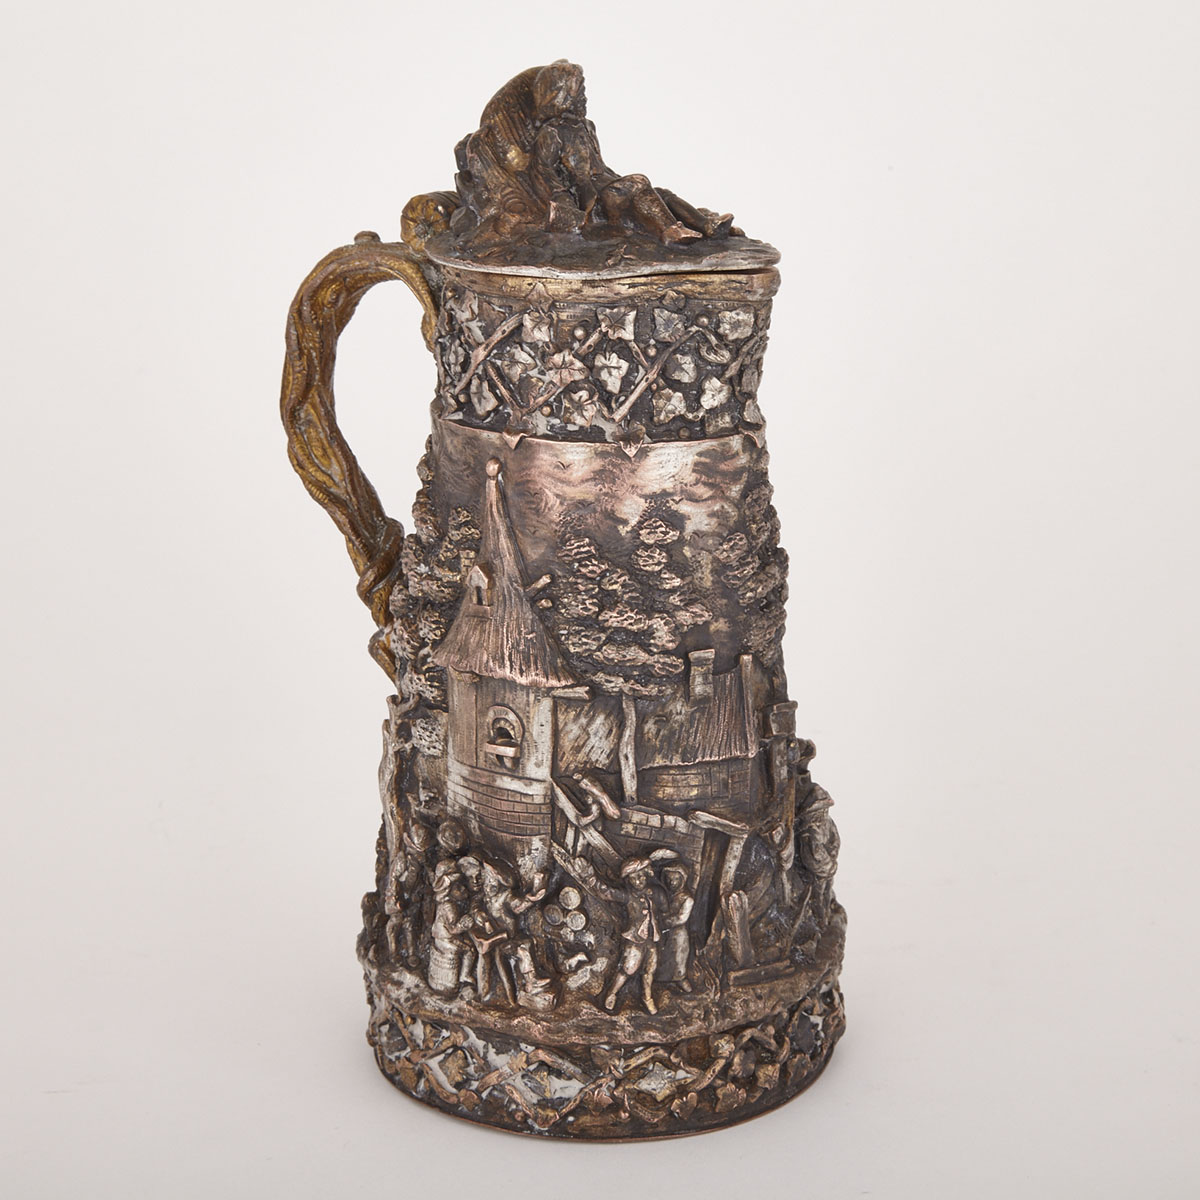 Victorian Electrotype Gilt and Silver Gilt Copper Ale Pitcher, 19th century